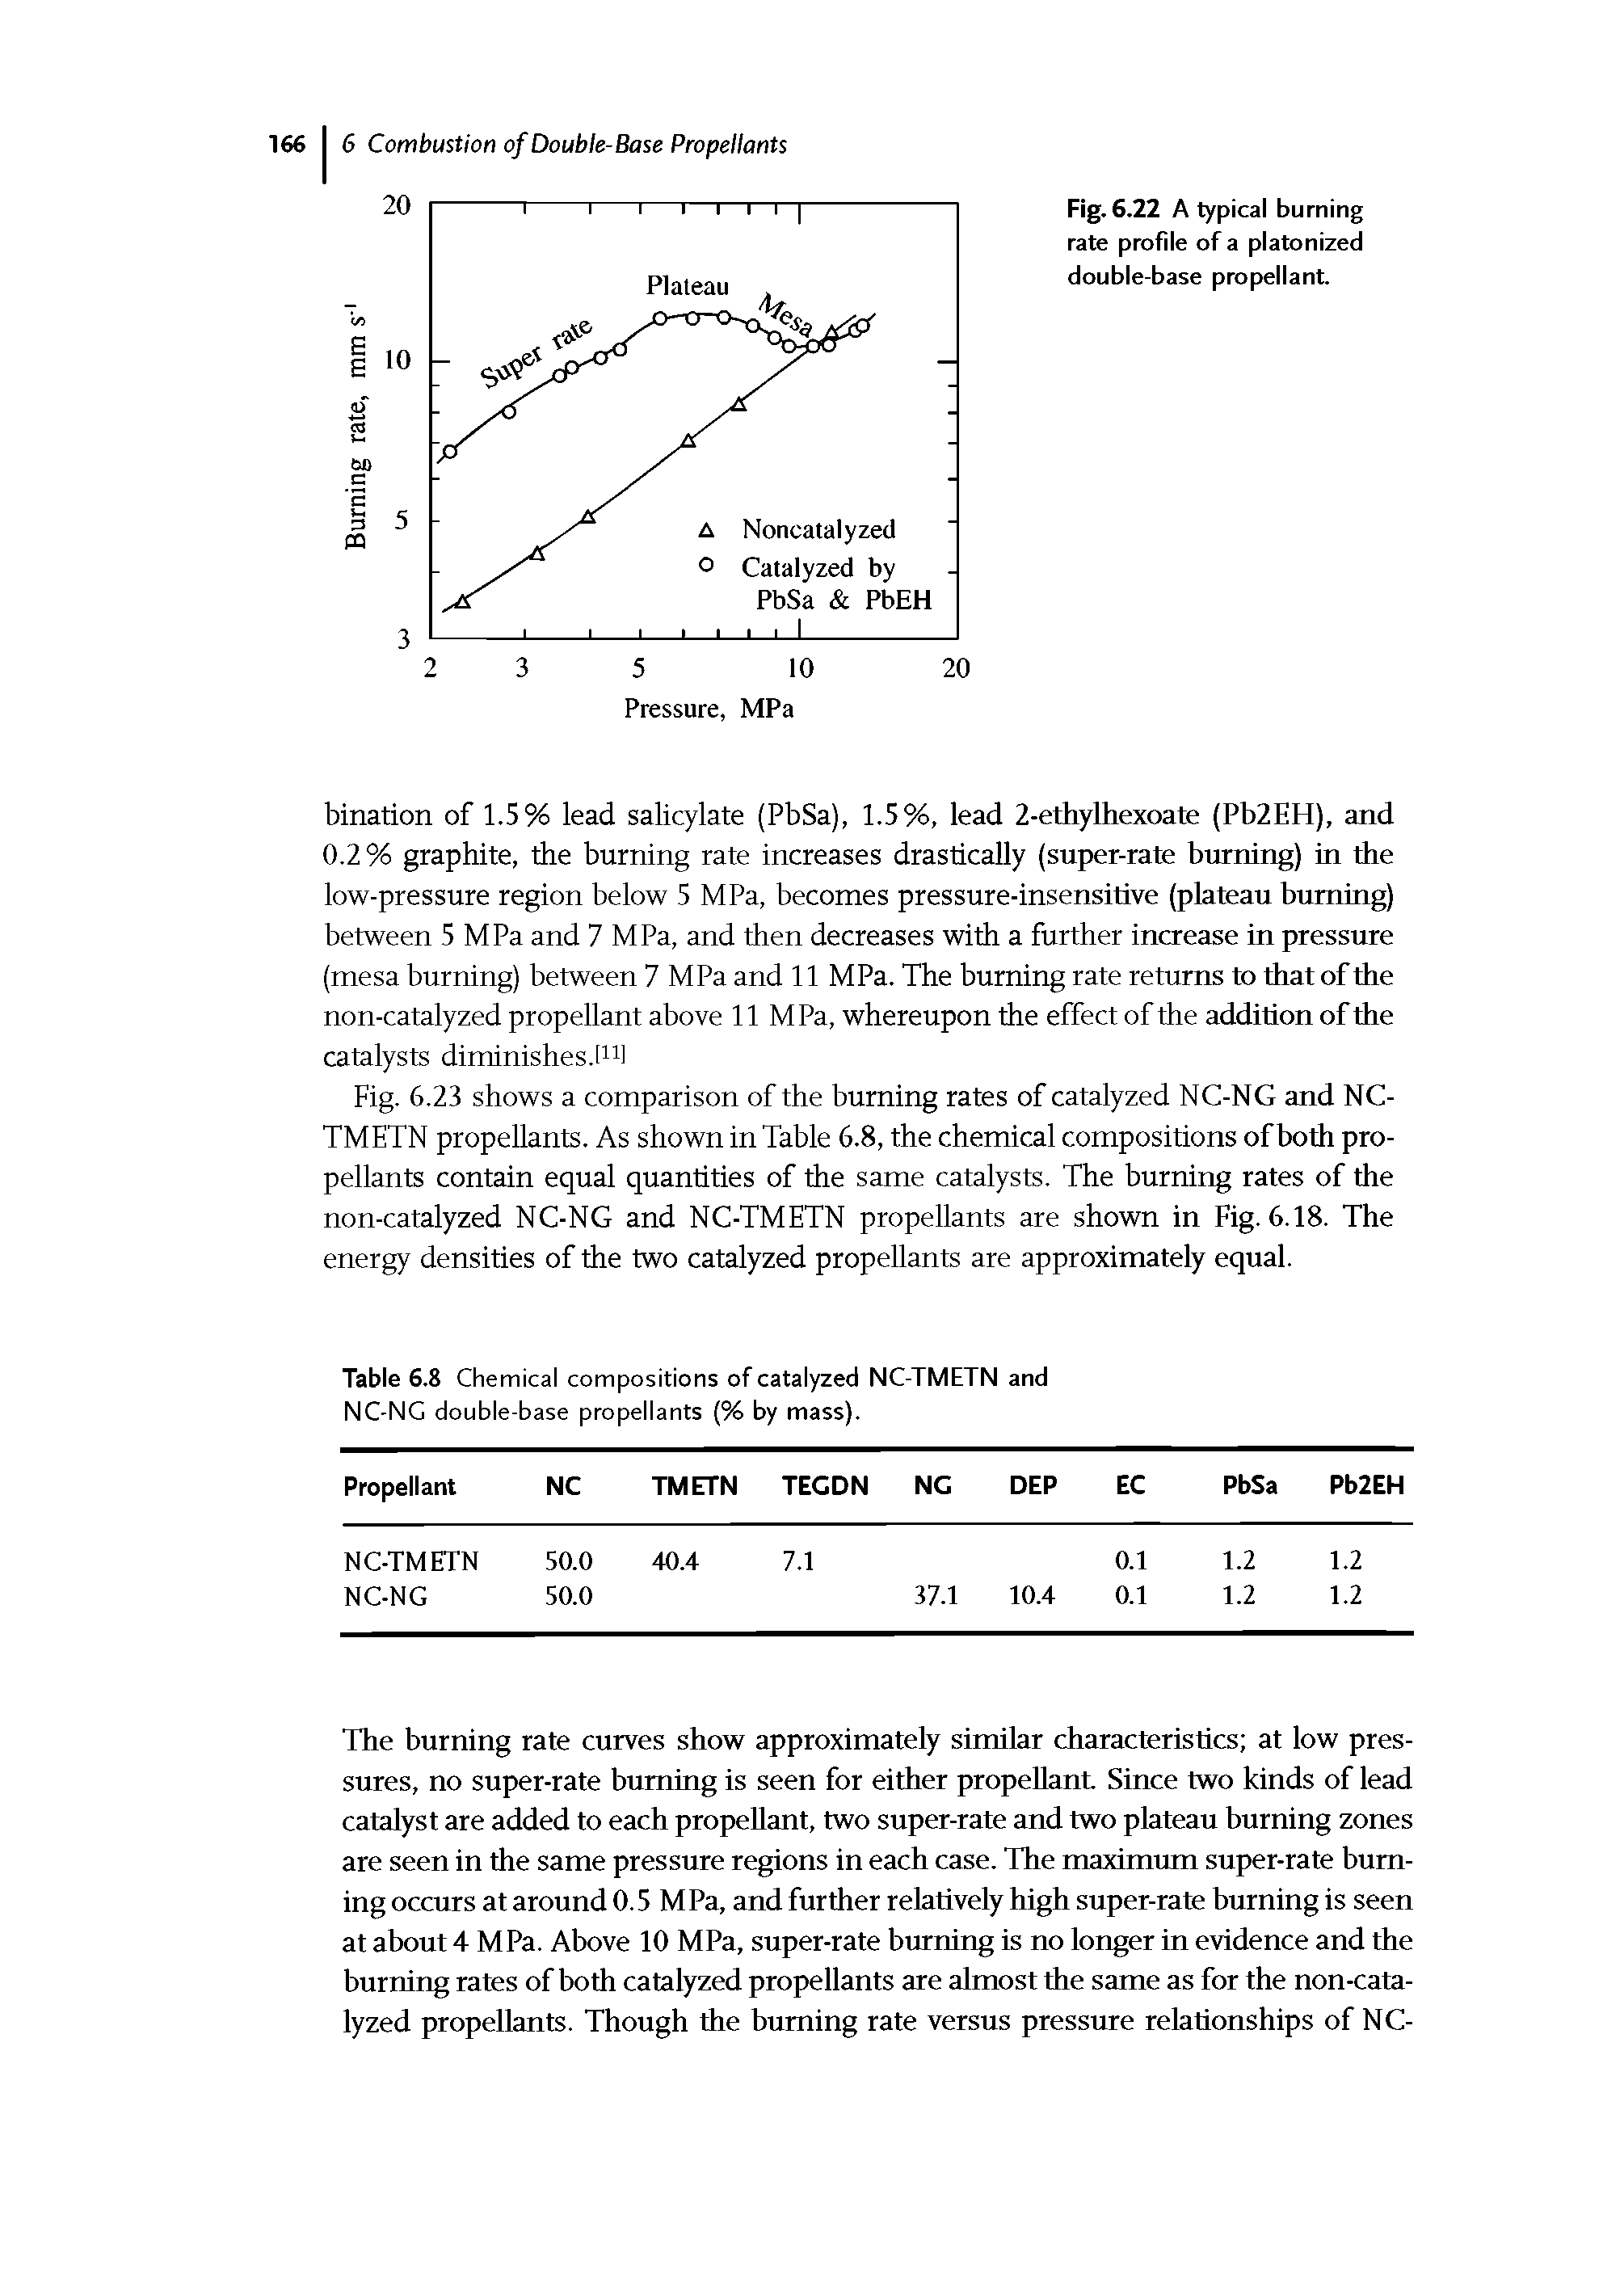 Fig. 6.23 shows a comparison of the burning rates of catalyzed NC-NG and NC-TMETN propellants. As shown in Table 6.8, the chemical compositions of both propellants contain equal quantities of the same catalysts. The burning rates of the non-catalyzed NC-NG and NC-TMETN propellants are shown in Fig. 6.18. The energy densities of the two catalyzed propellants are approximately equal.